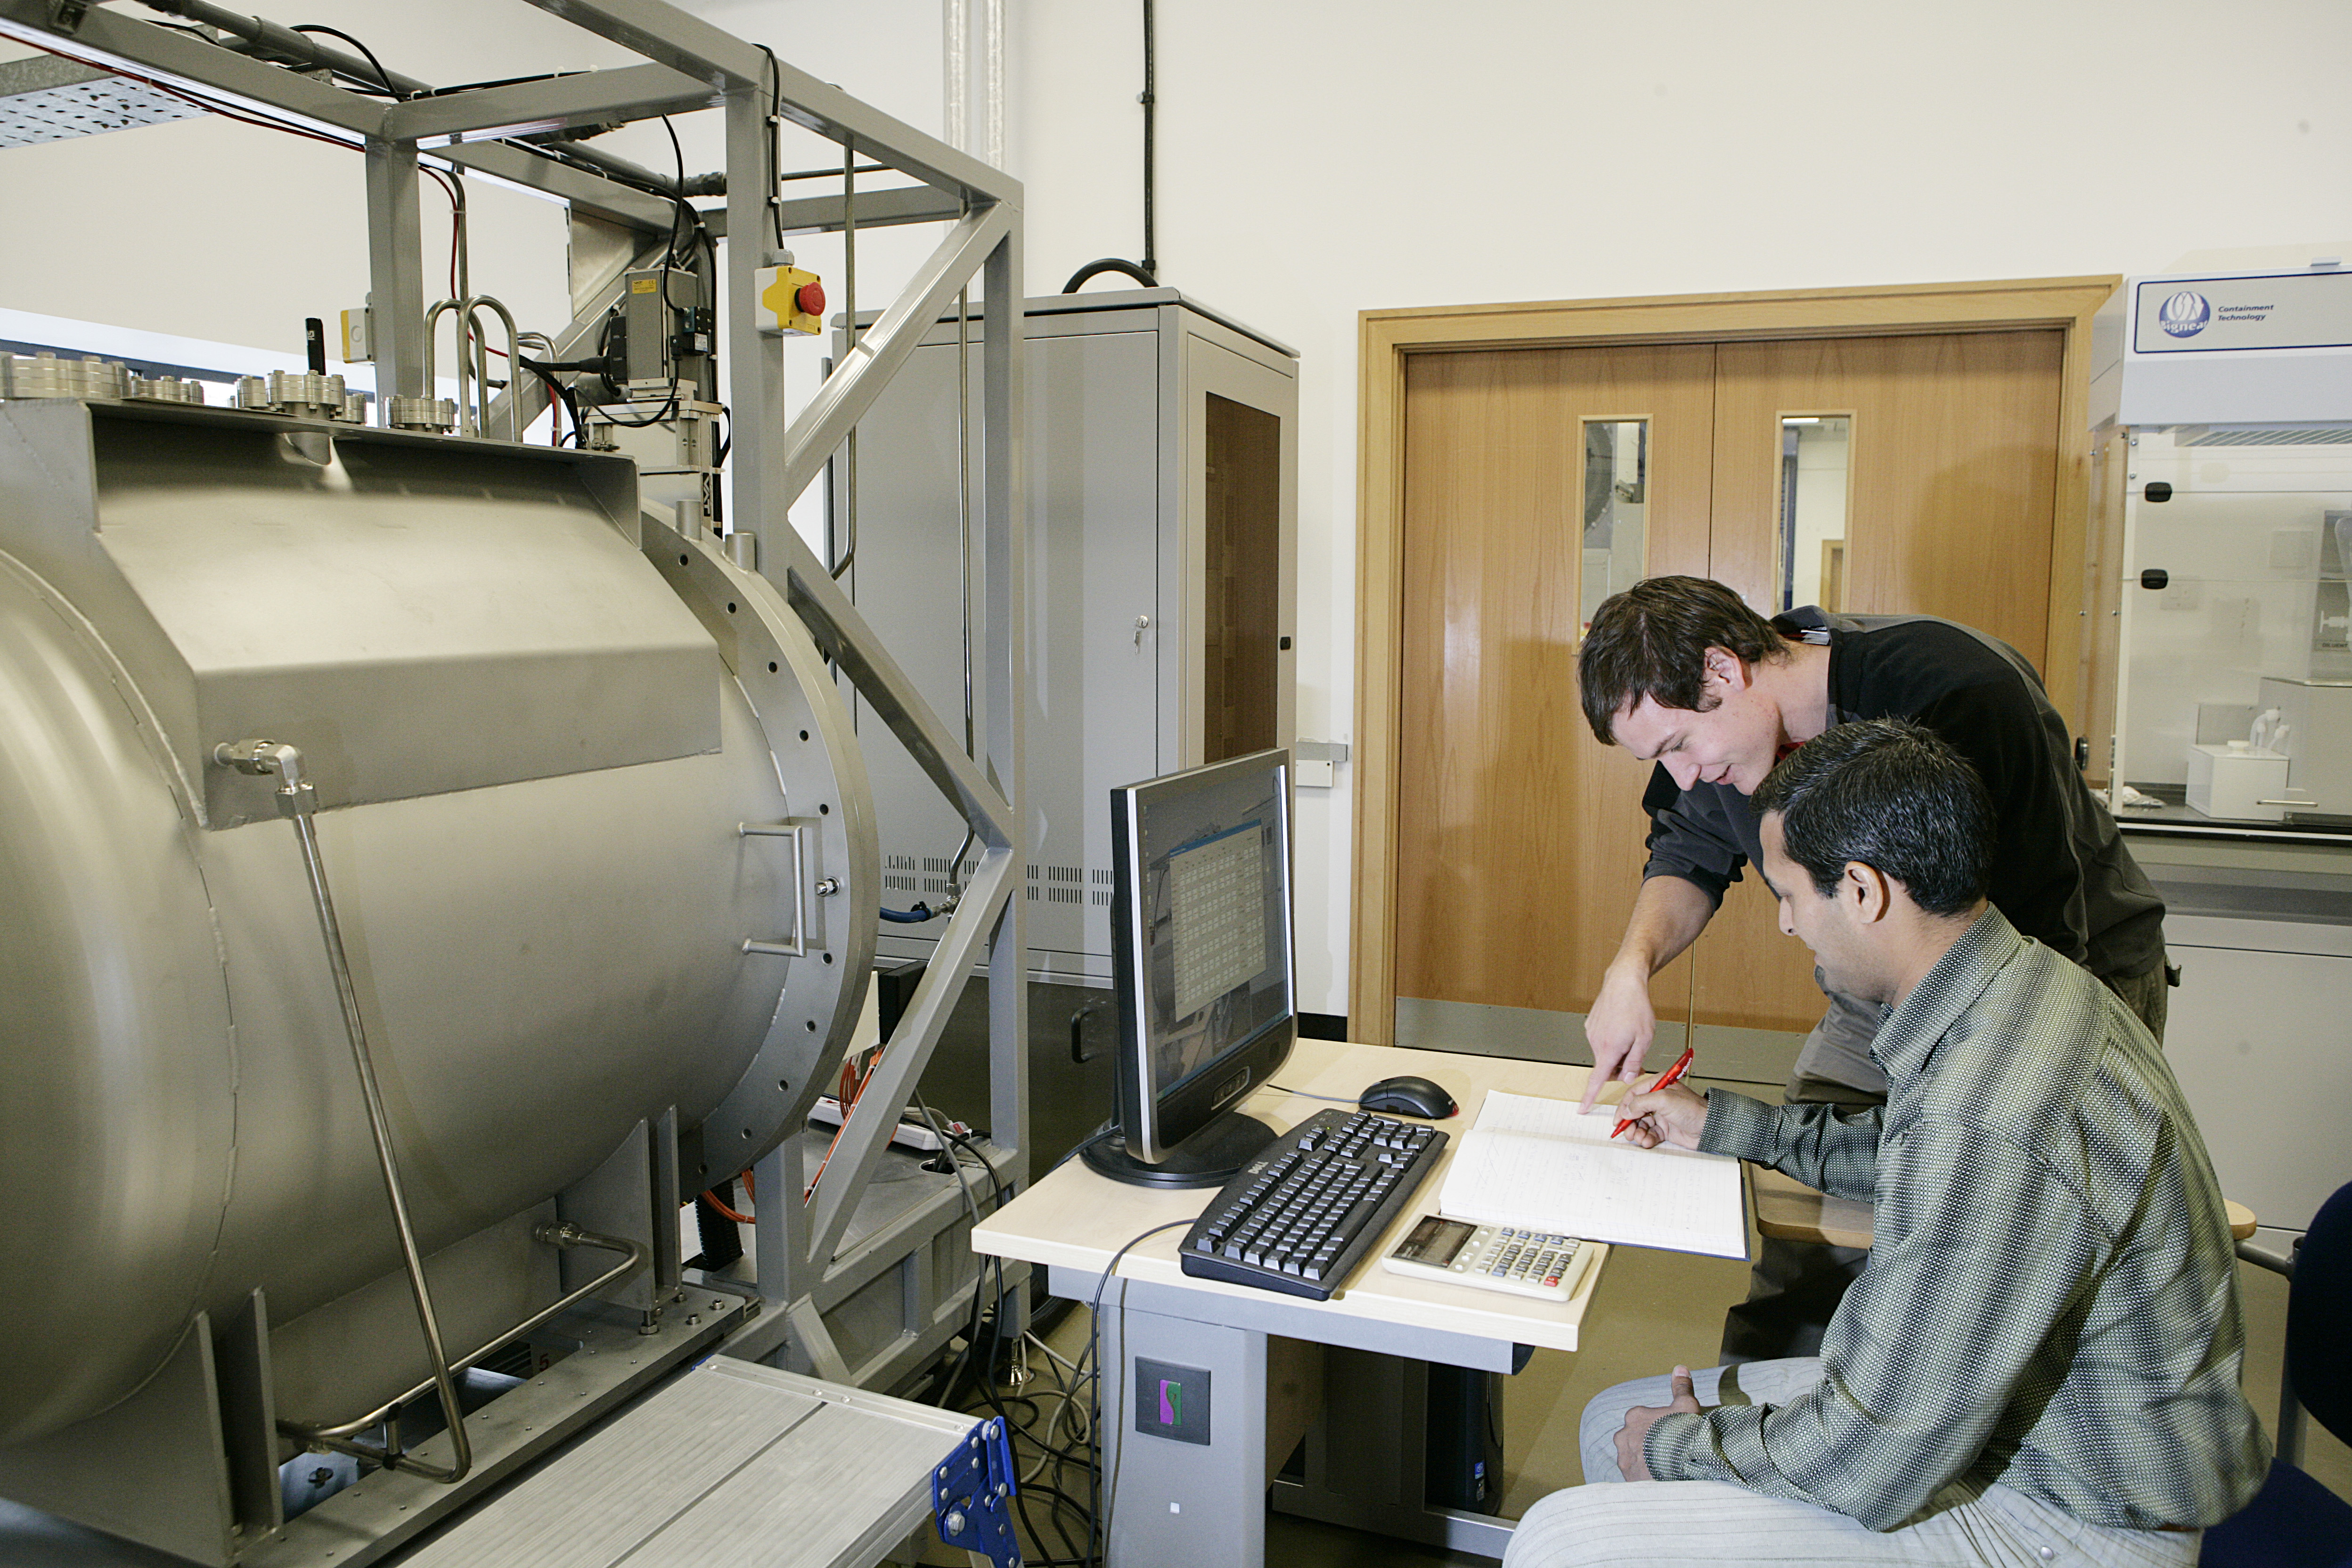 Image of two people making notes alongside the large lab equipment at NETpark